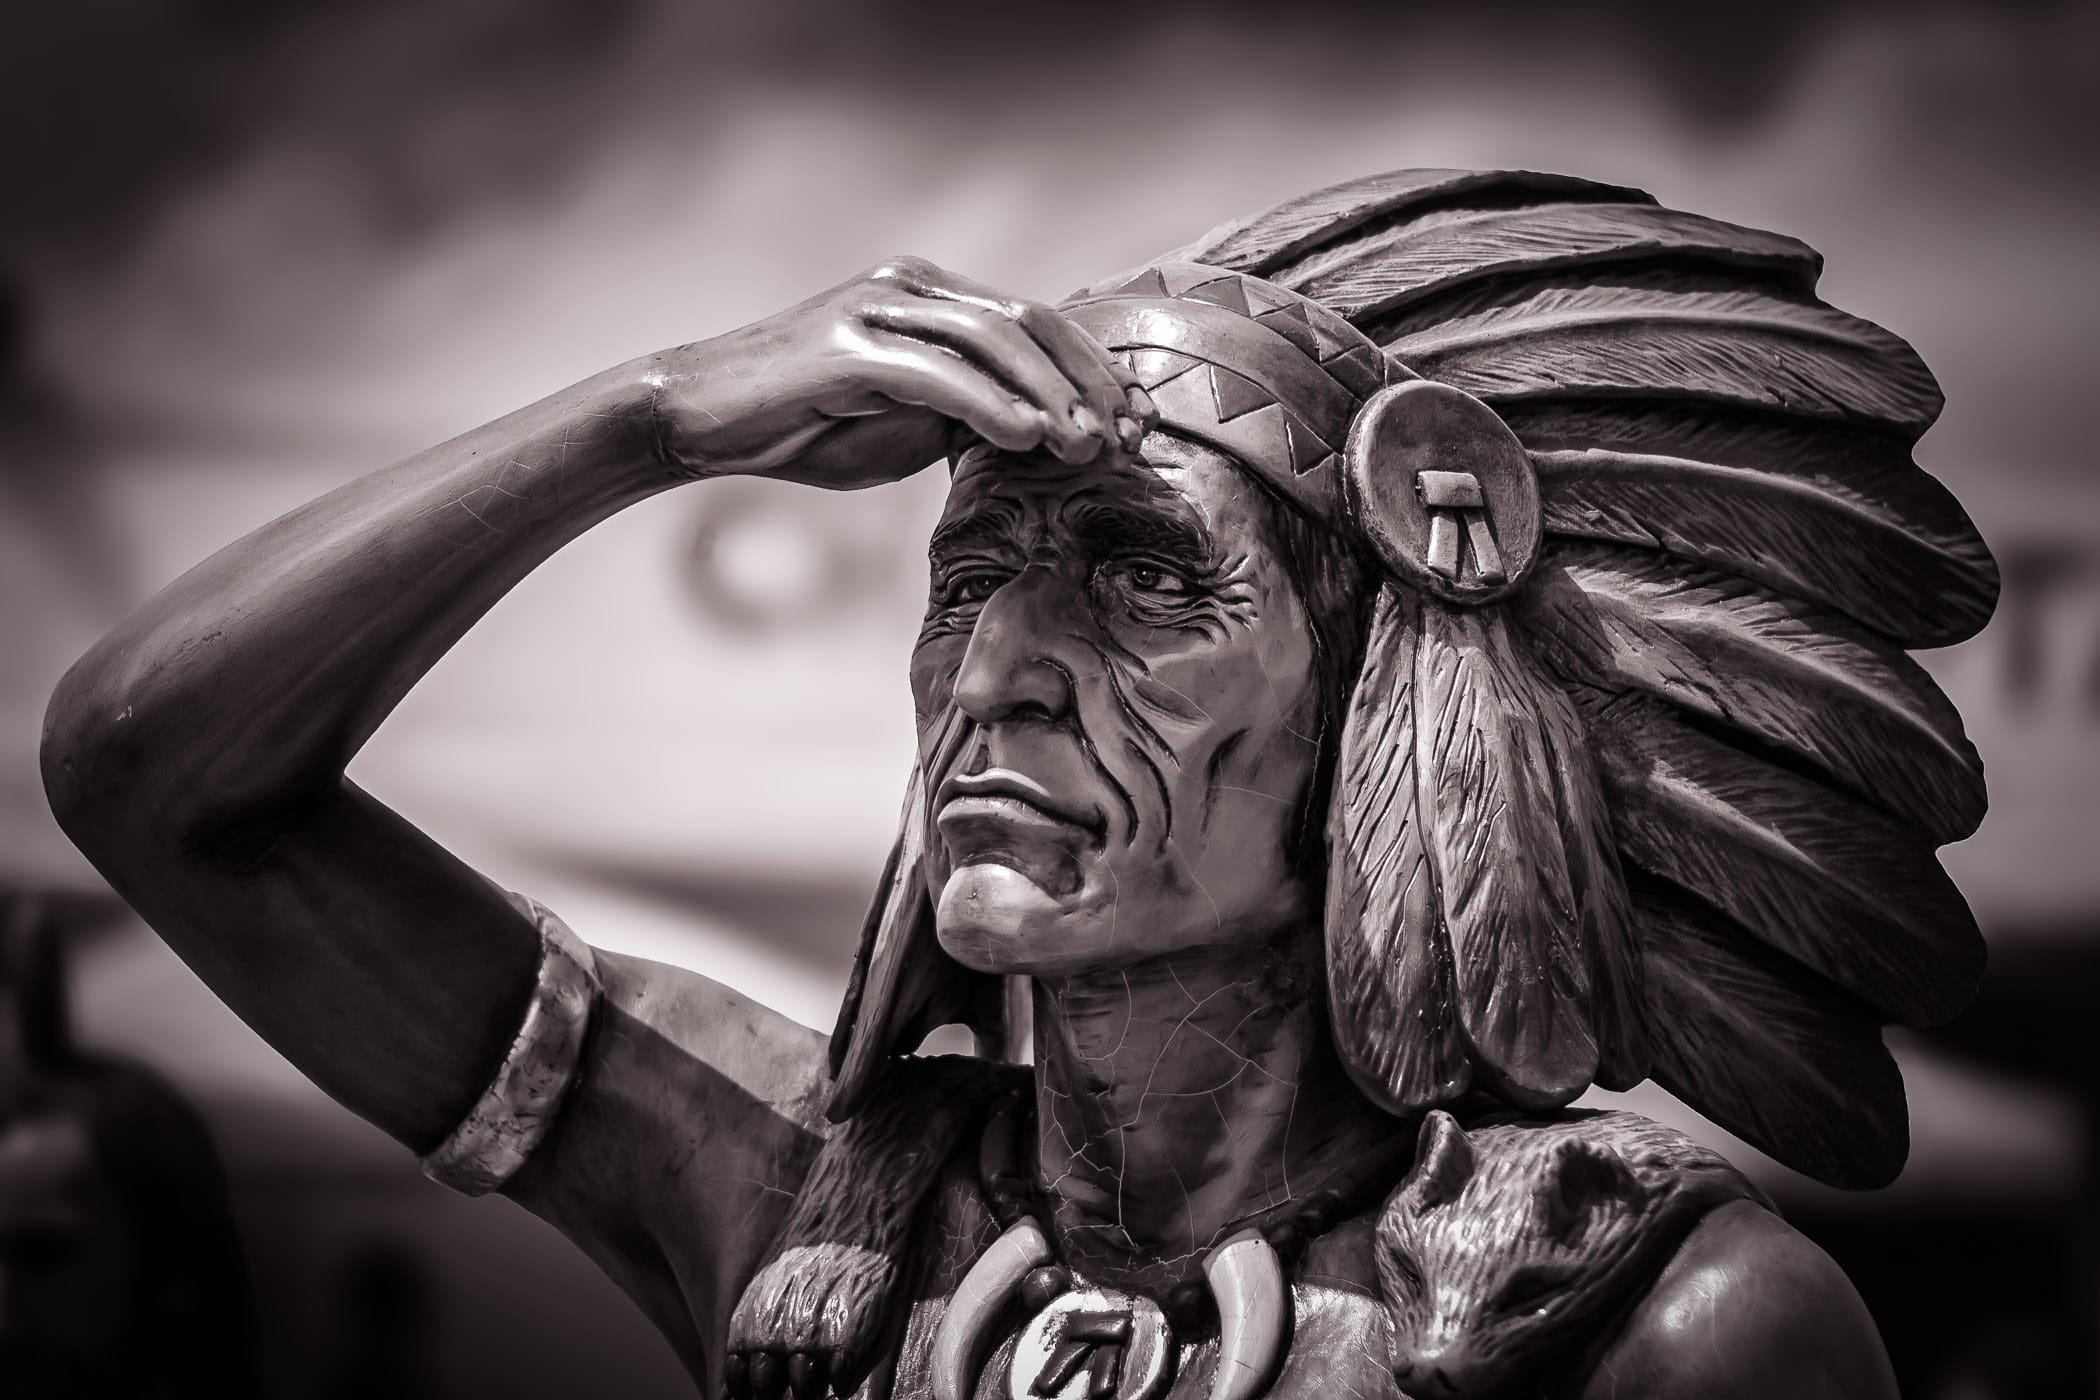 A statue of an American Indian outside of a botanica in Oak Cliff, Dallas.